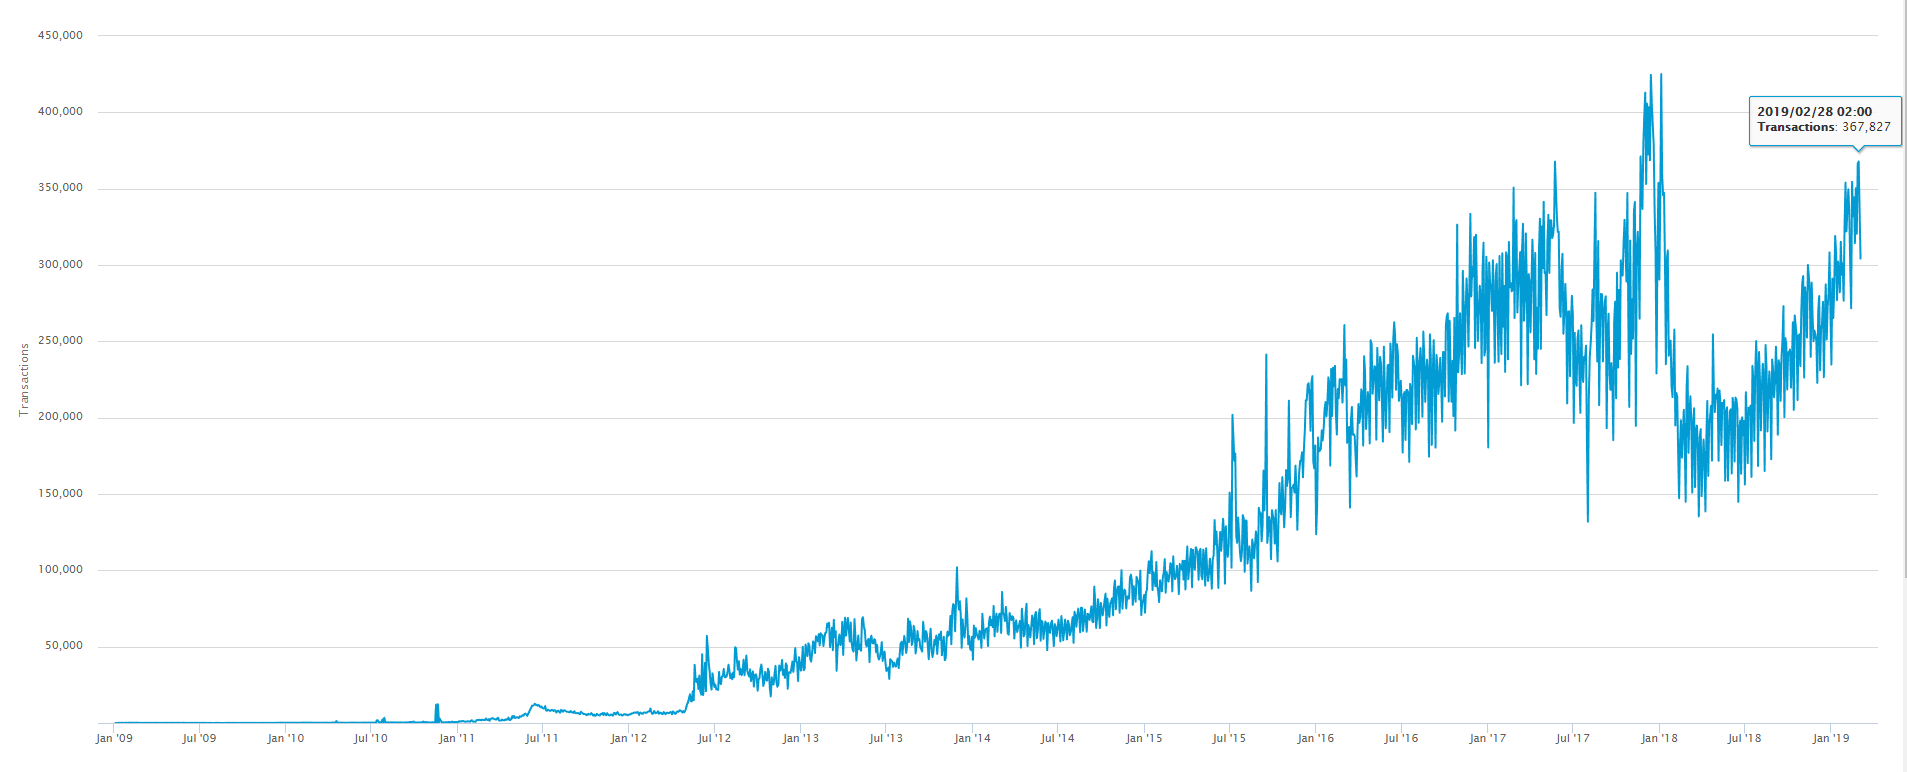 Bitcoin daily confirmed transactions